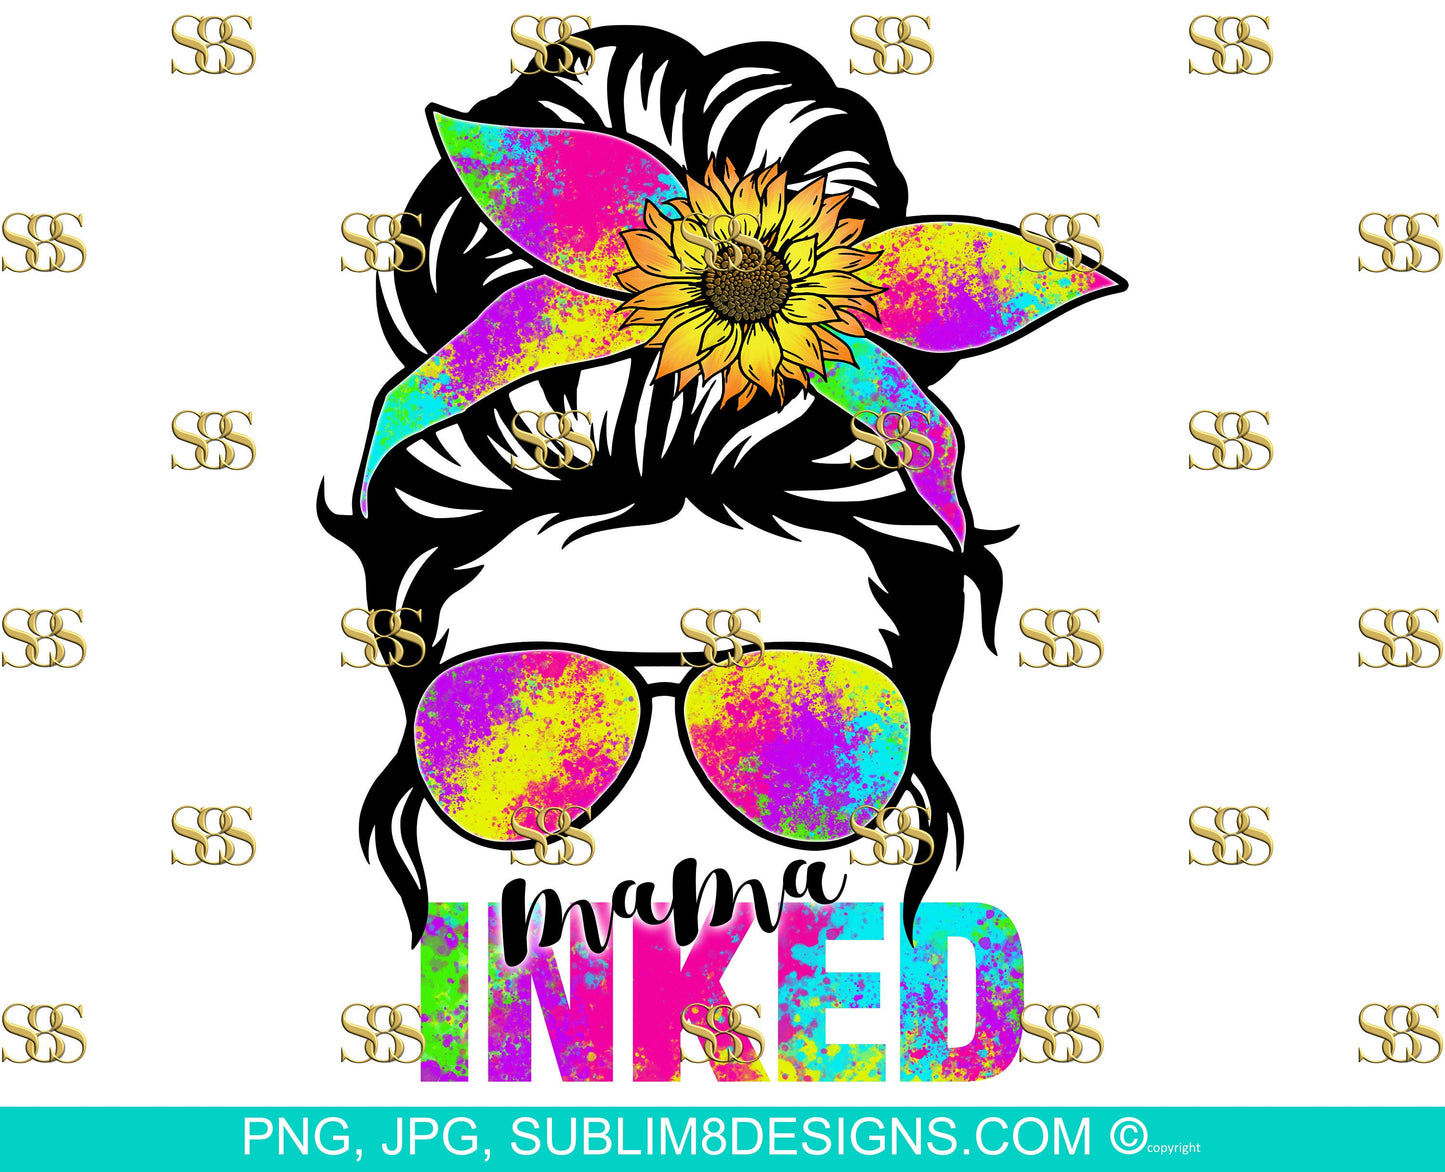 Inked Mama Sublimation Design PNG and JPG ONLY